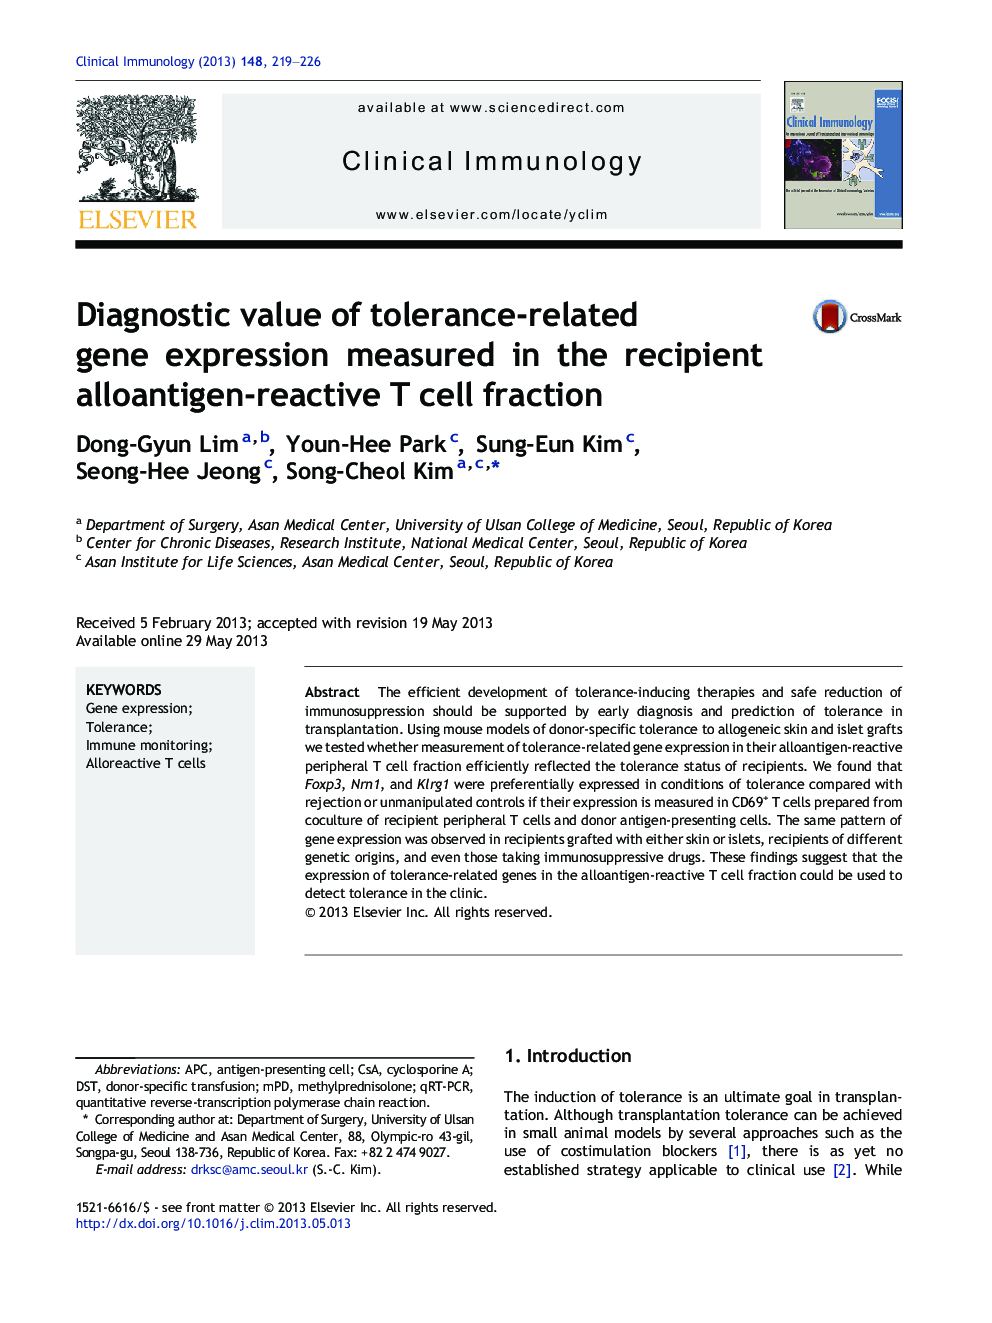 Diagnostic value of tolerance-related gene expression measured in the recipient alloantigen-reactive T cell fraction